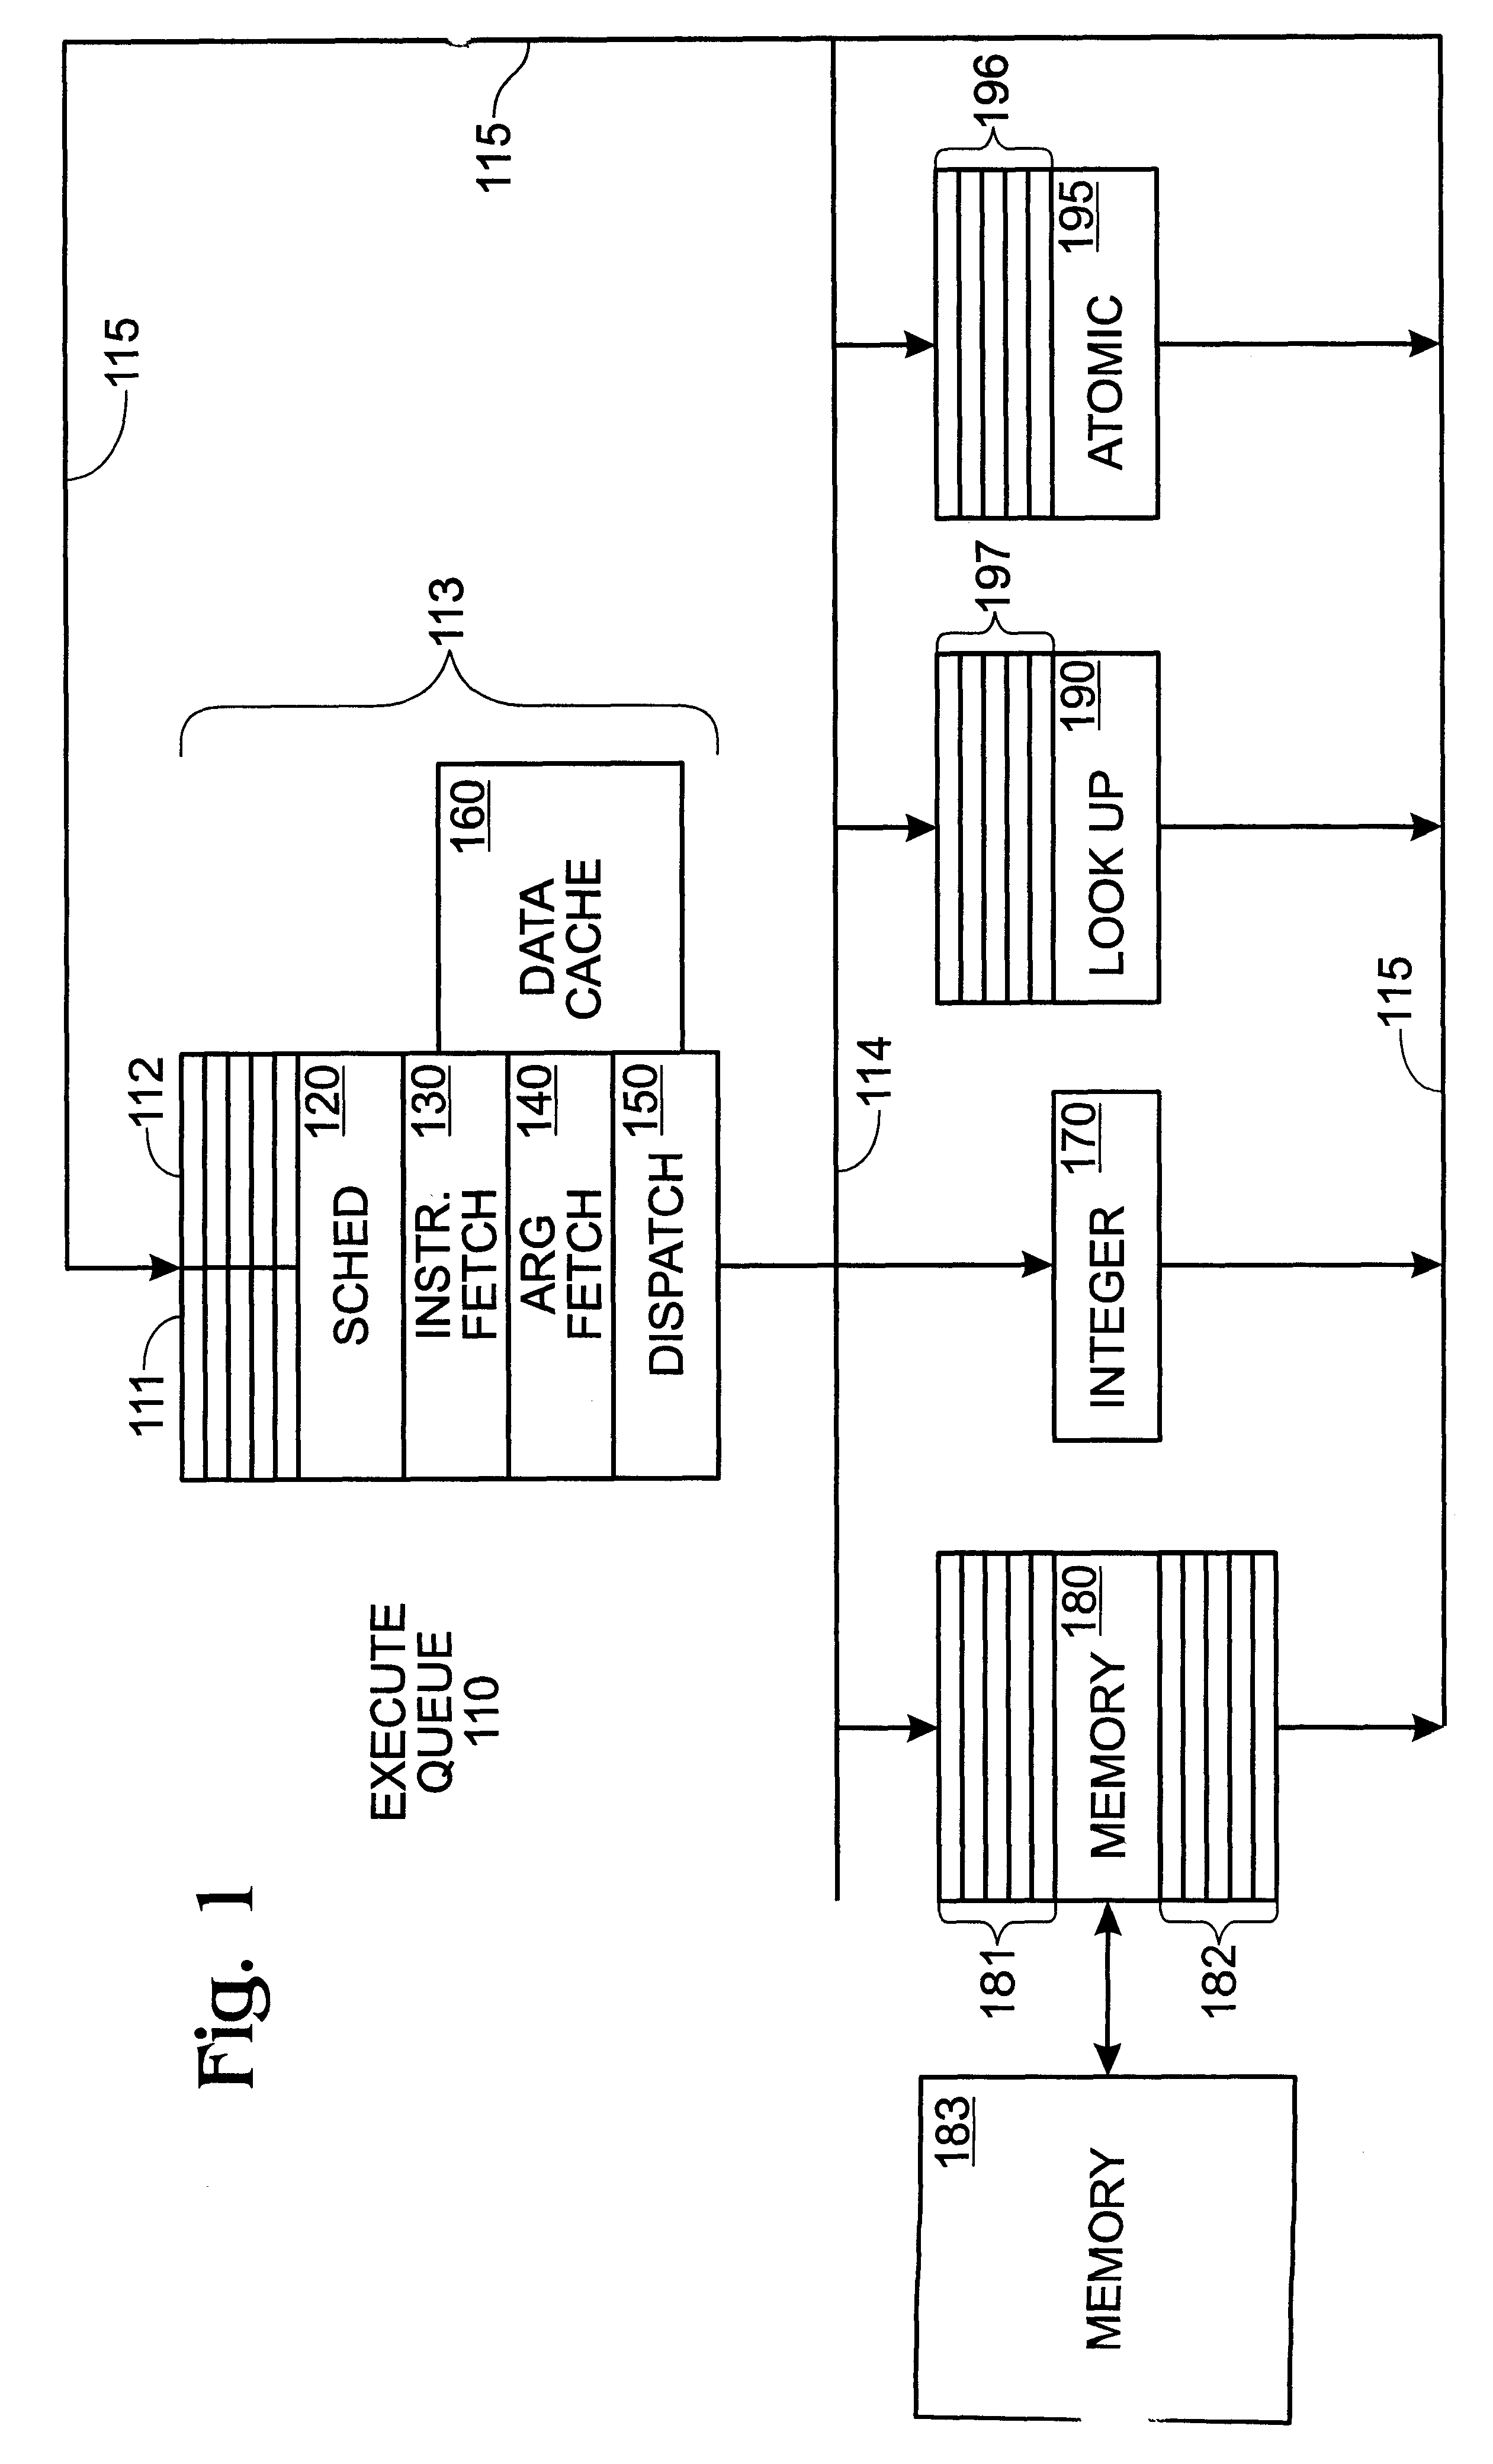 Method and apparatus for handling cache misses in a computer system